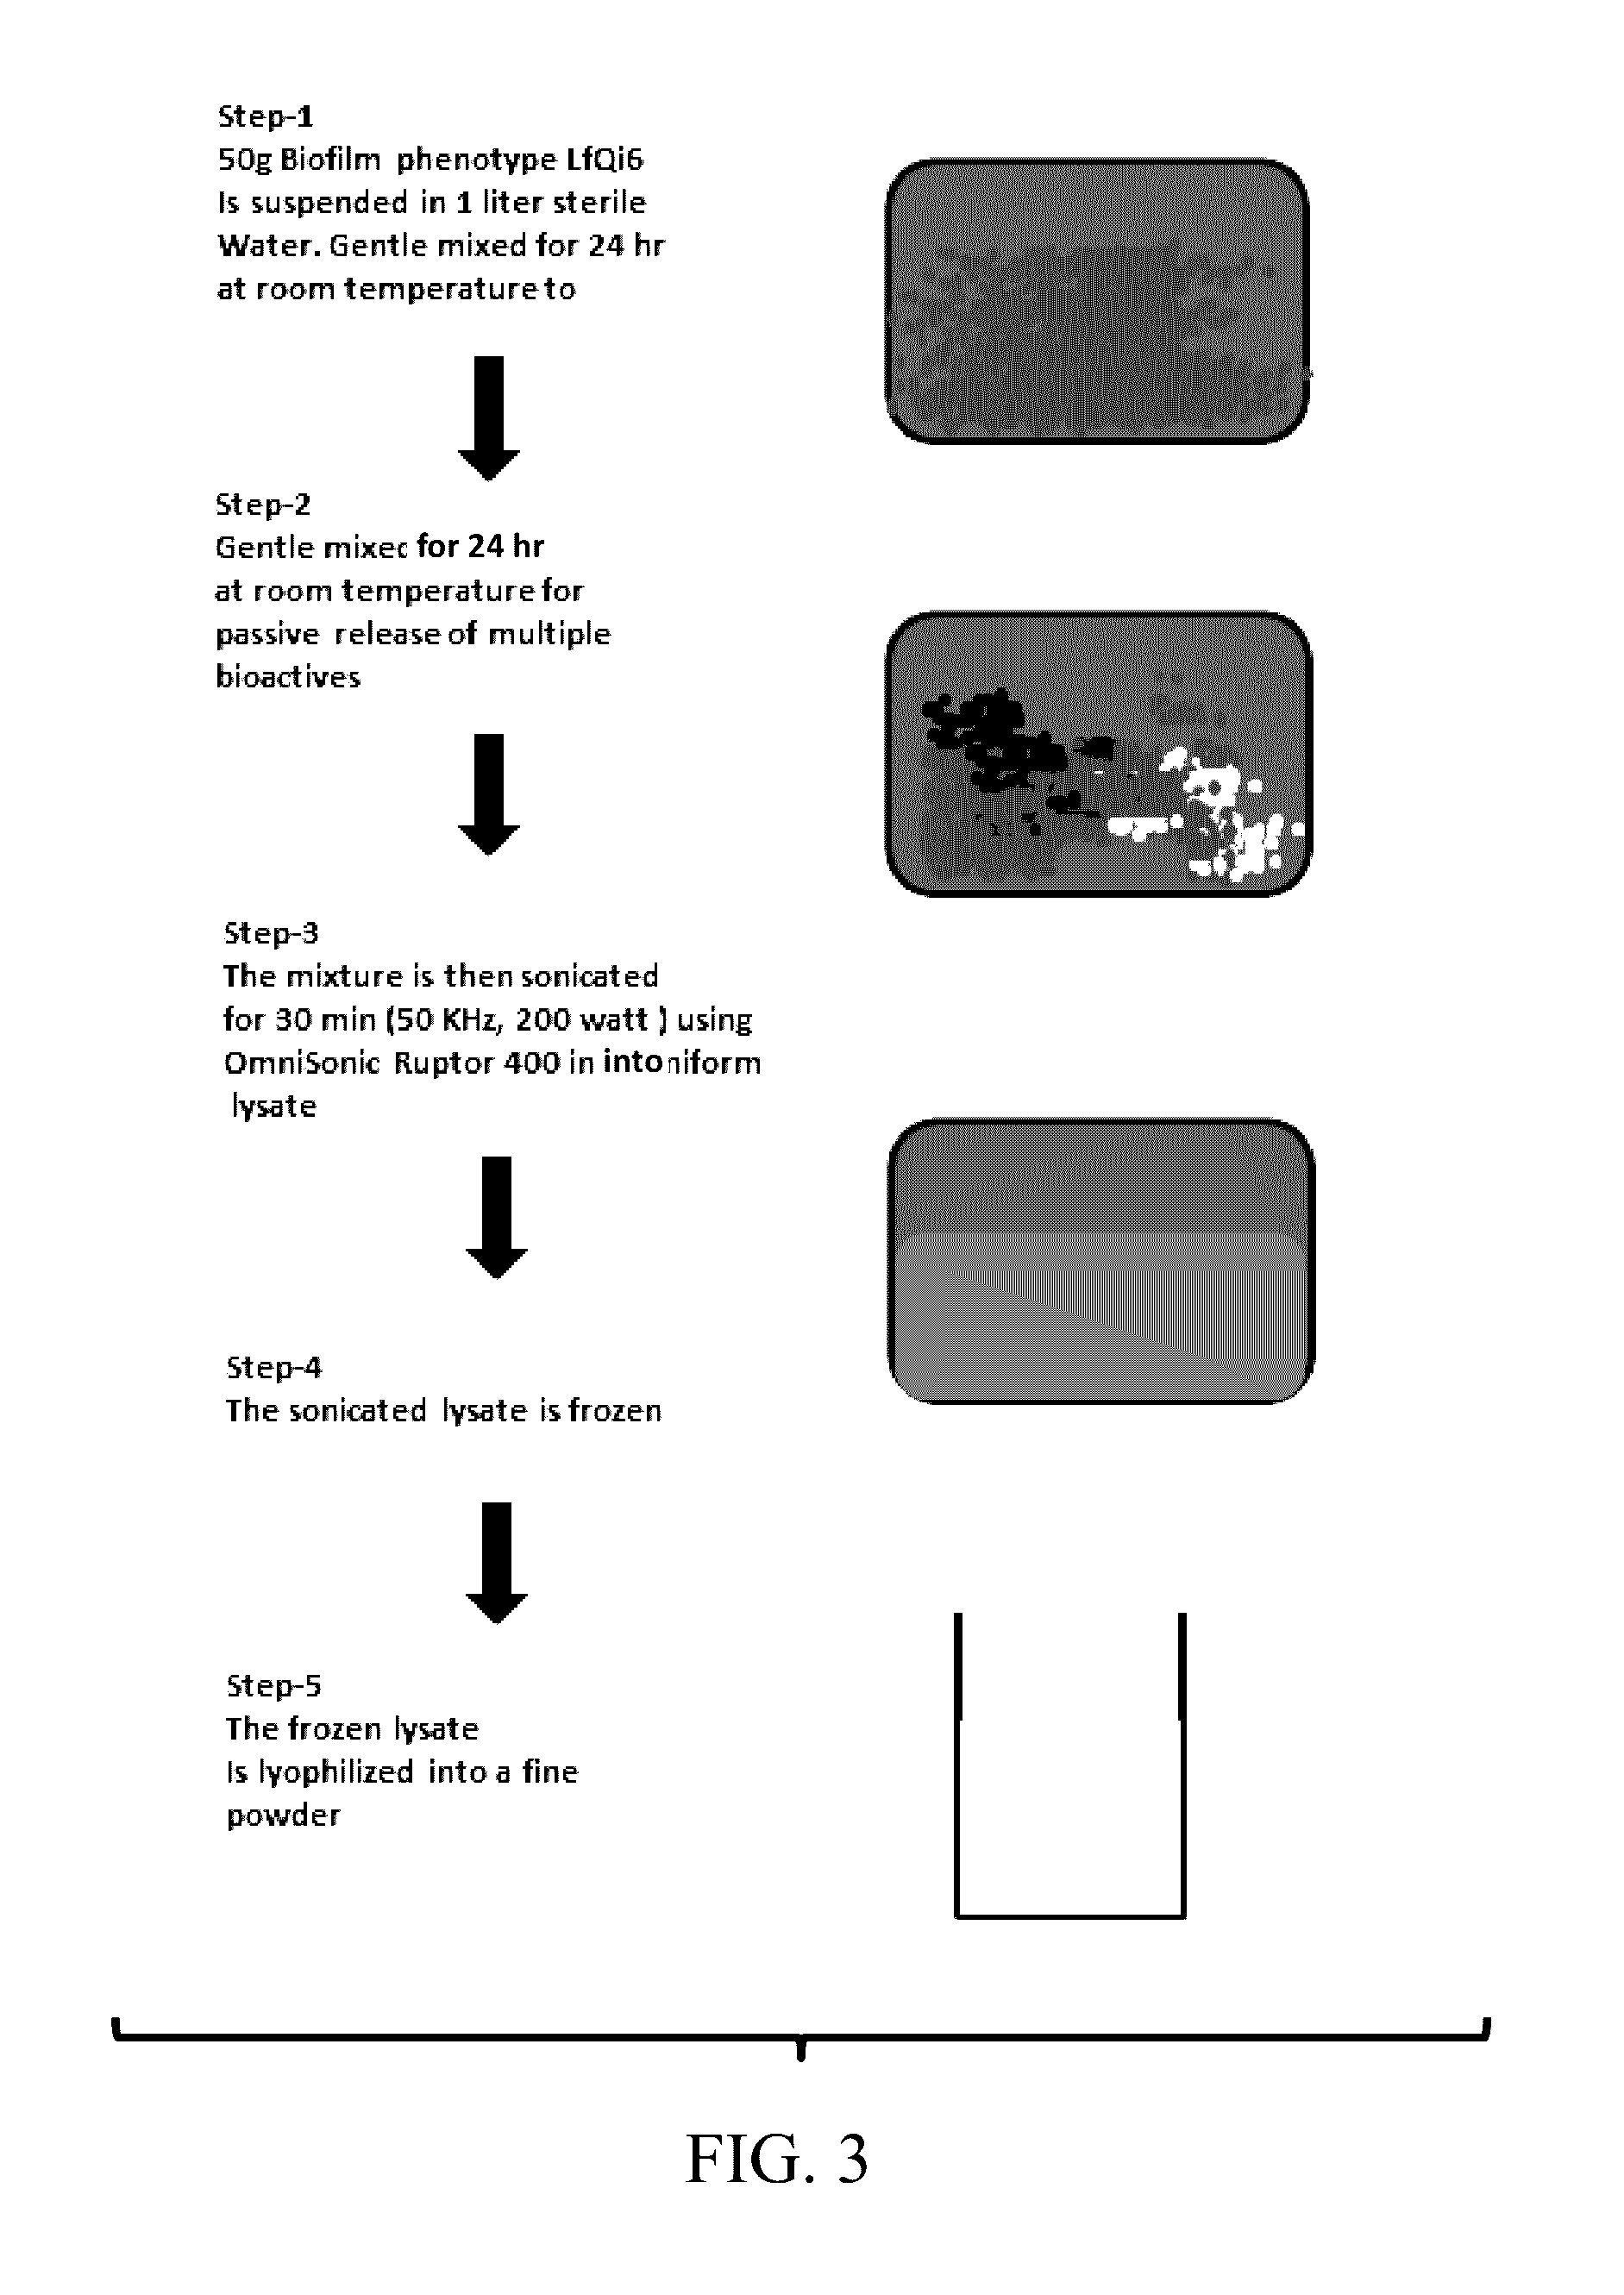 Materials and Methods for Improving Immune Responses and Skin and/or Mucosal Barrier Functions